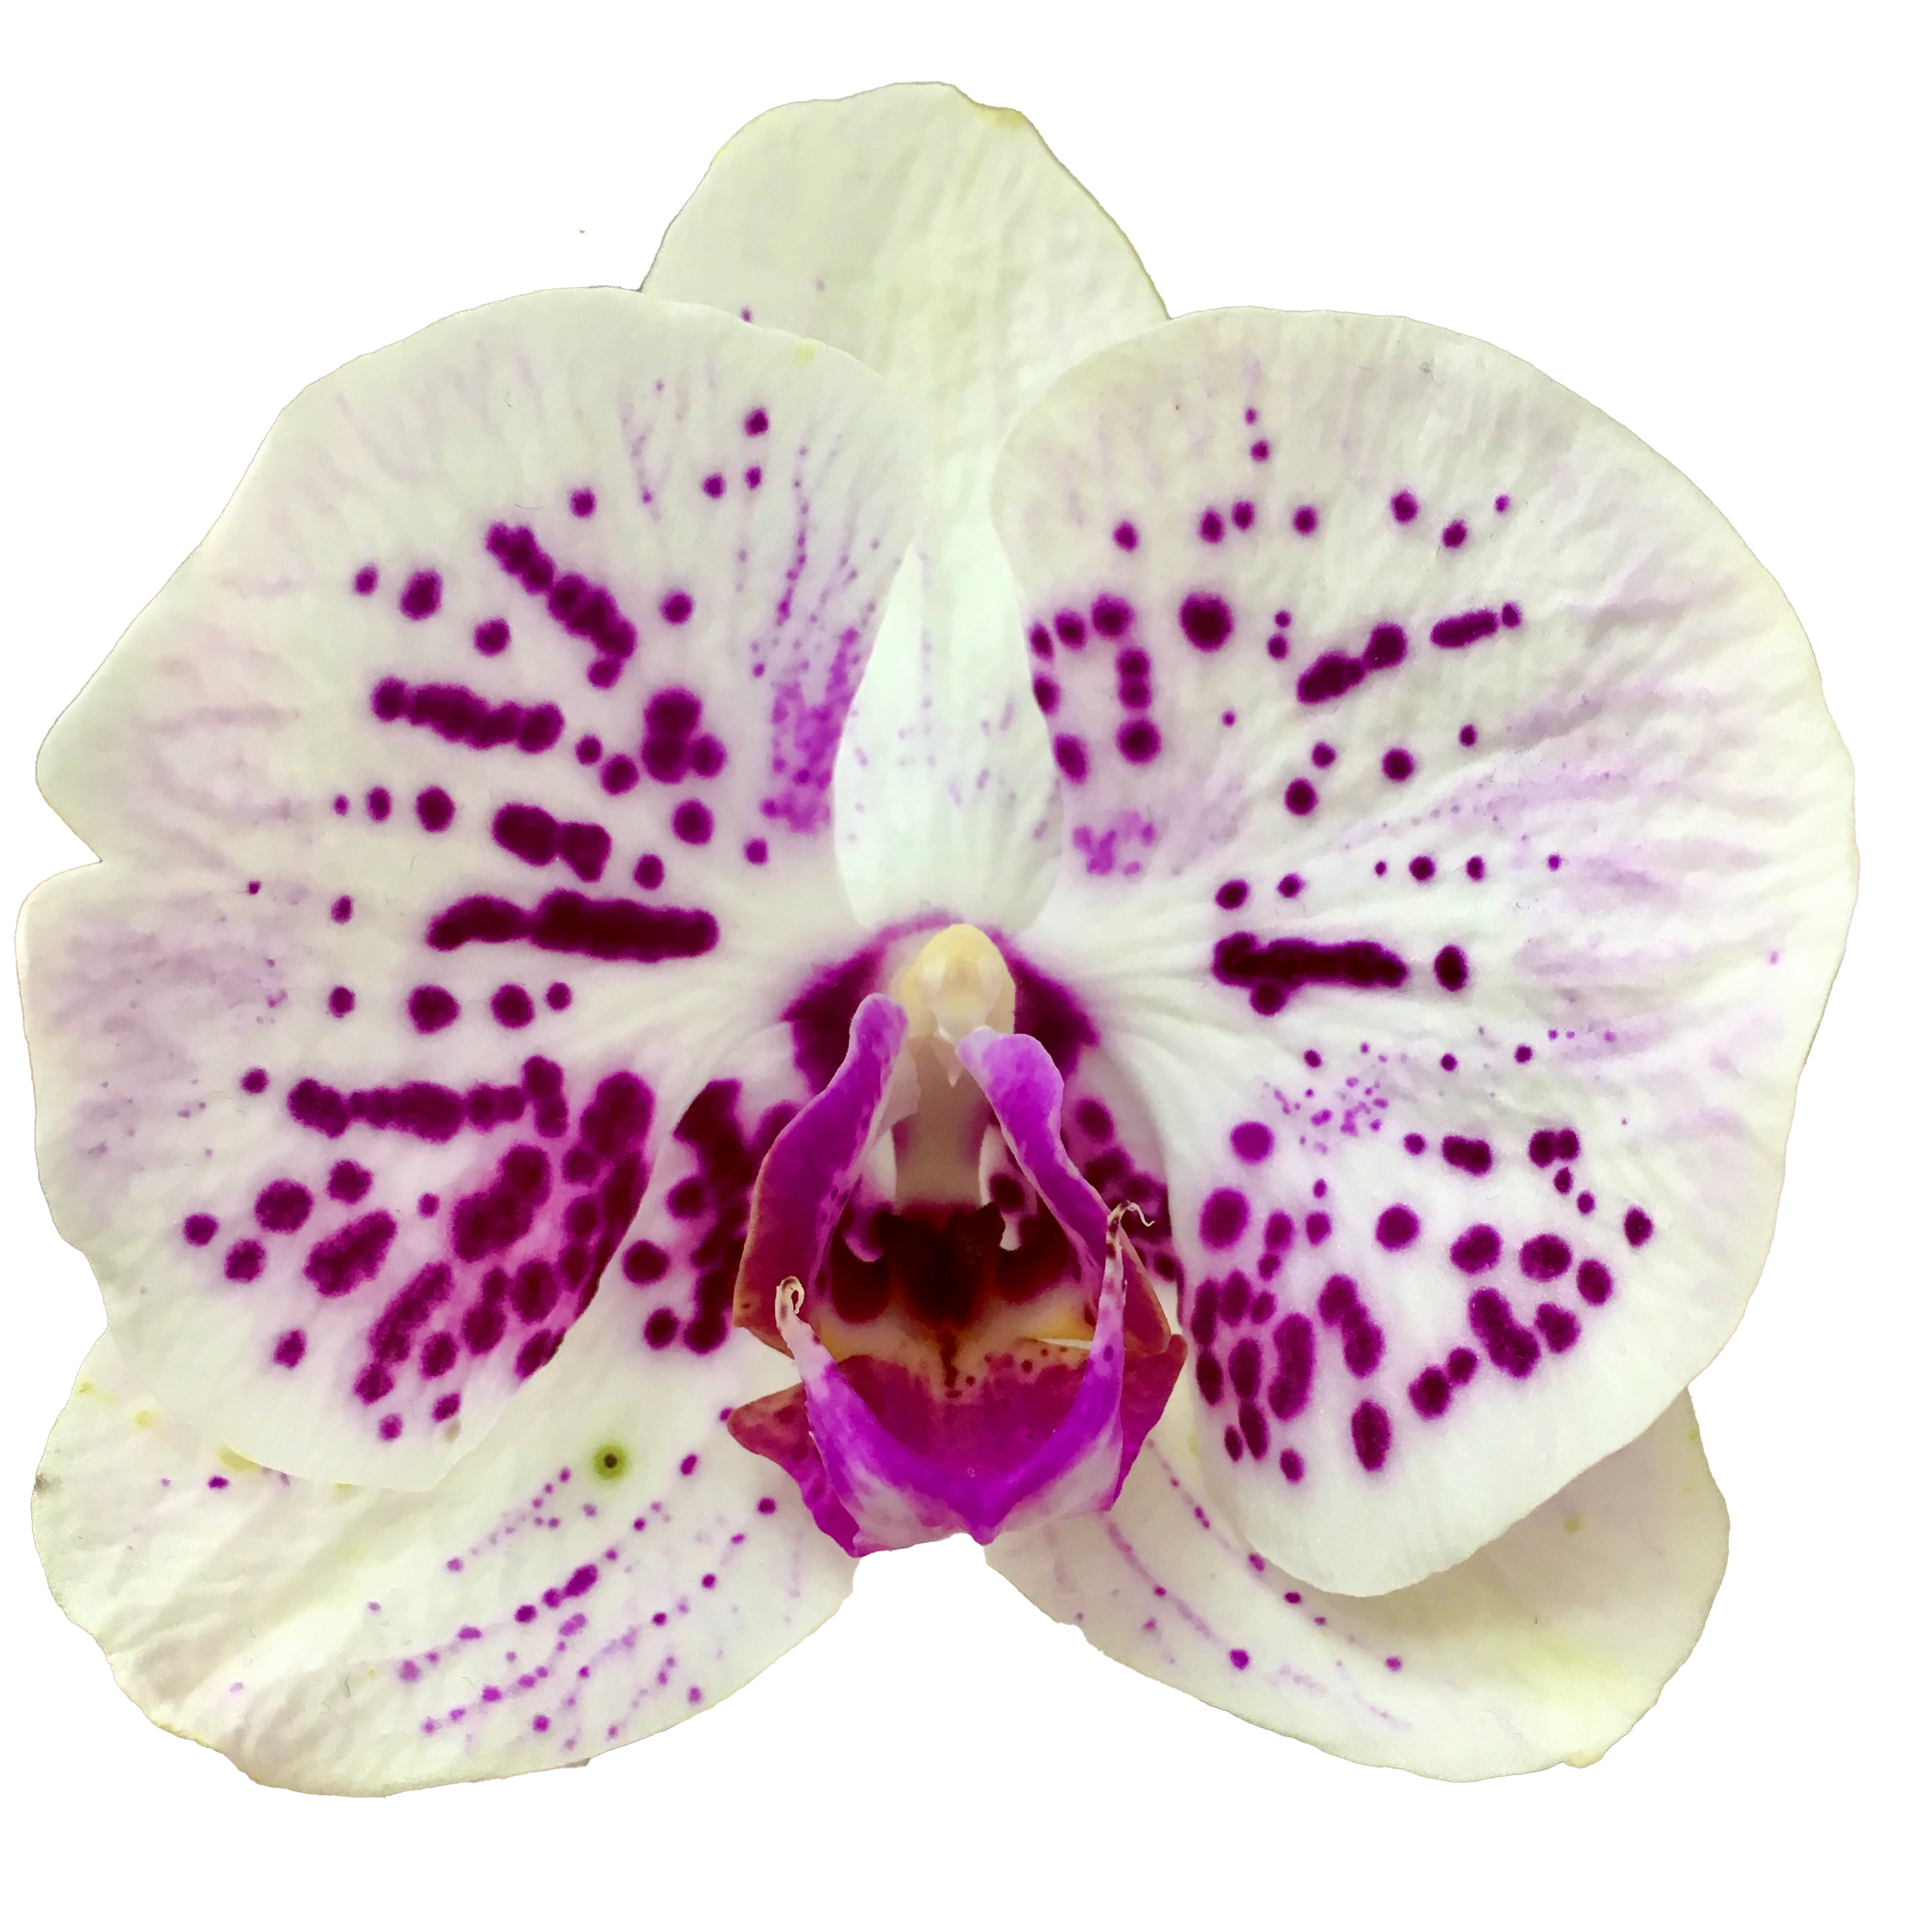 A white orchid flower with dark purple speckles